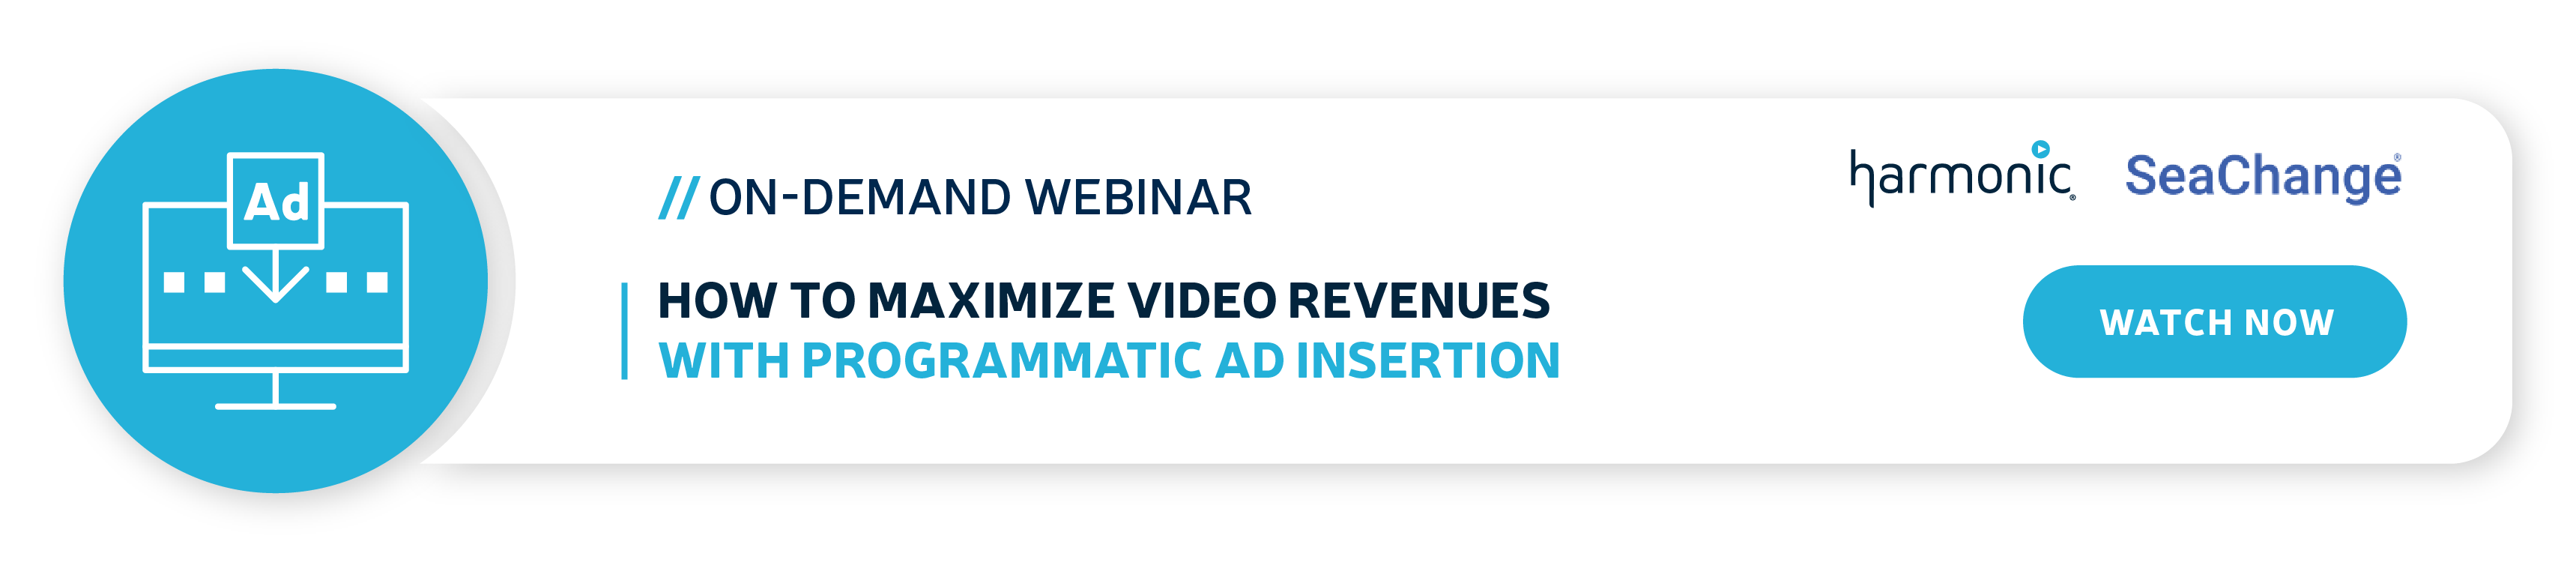 How to maximize revenues with programmatic ad insertion